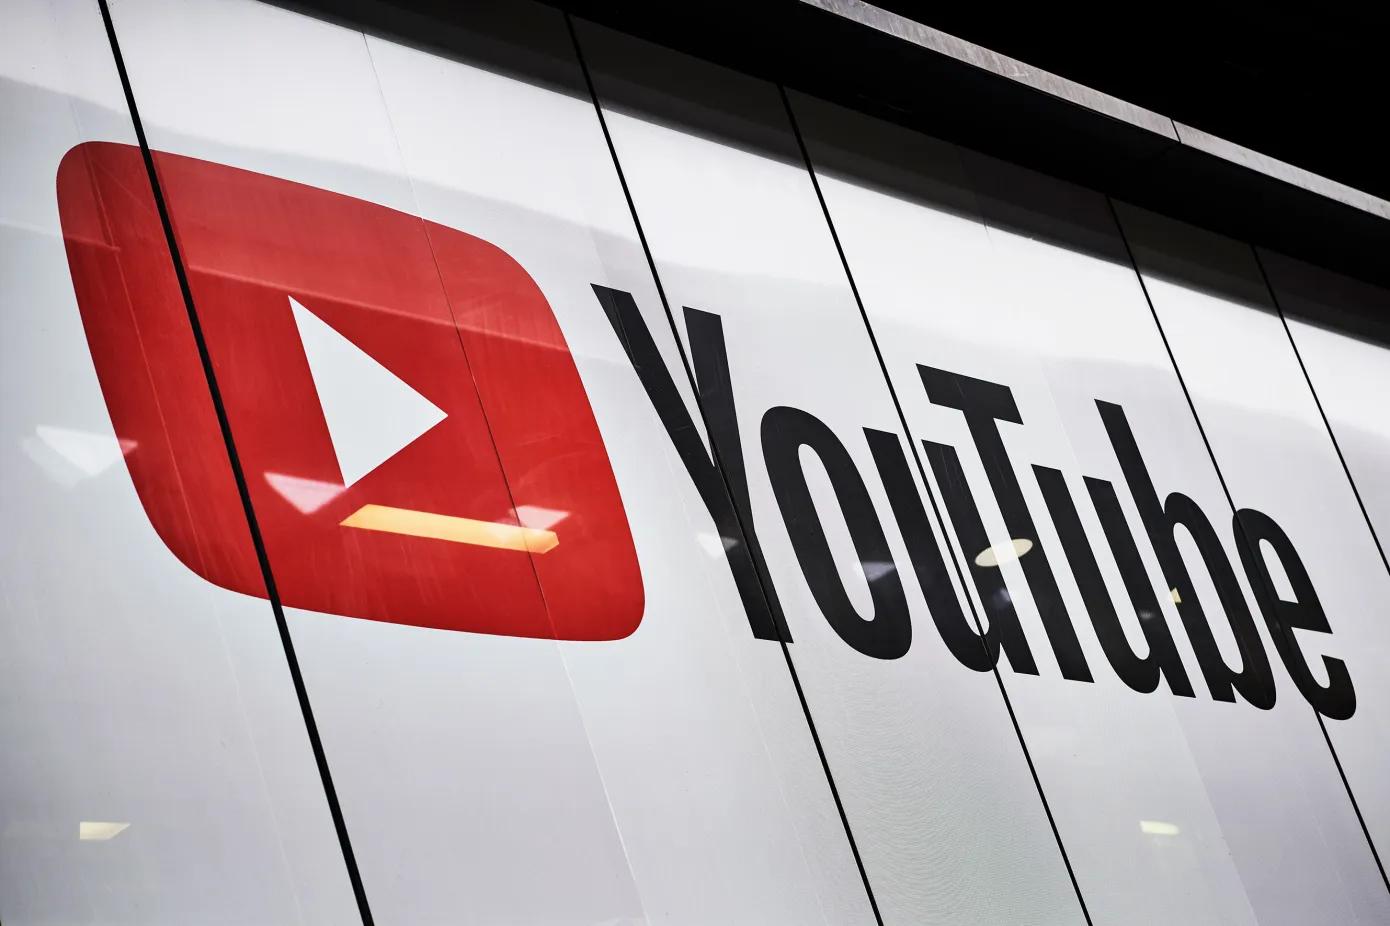 YouTube is testing a search feature to compete with Shazam, which will allow users hum to identify a song.